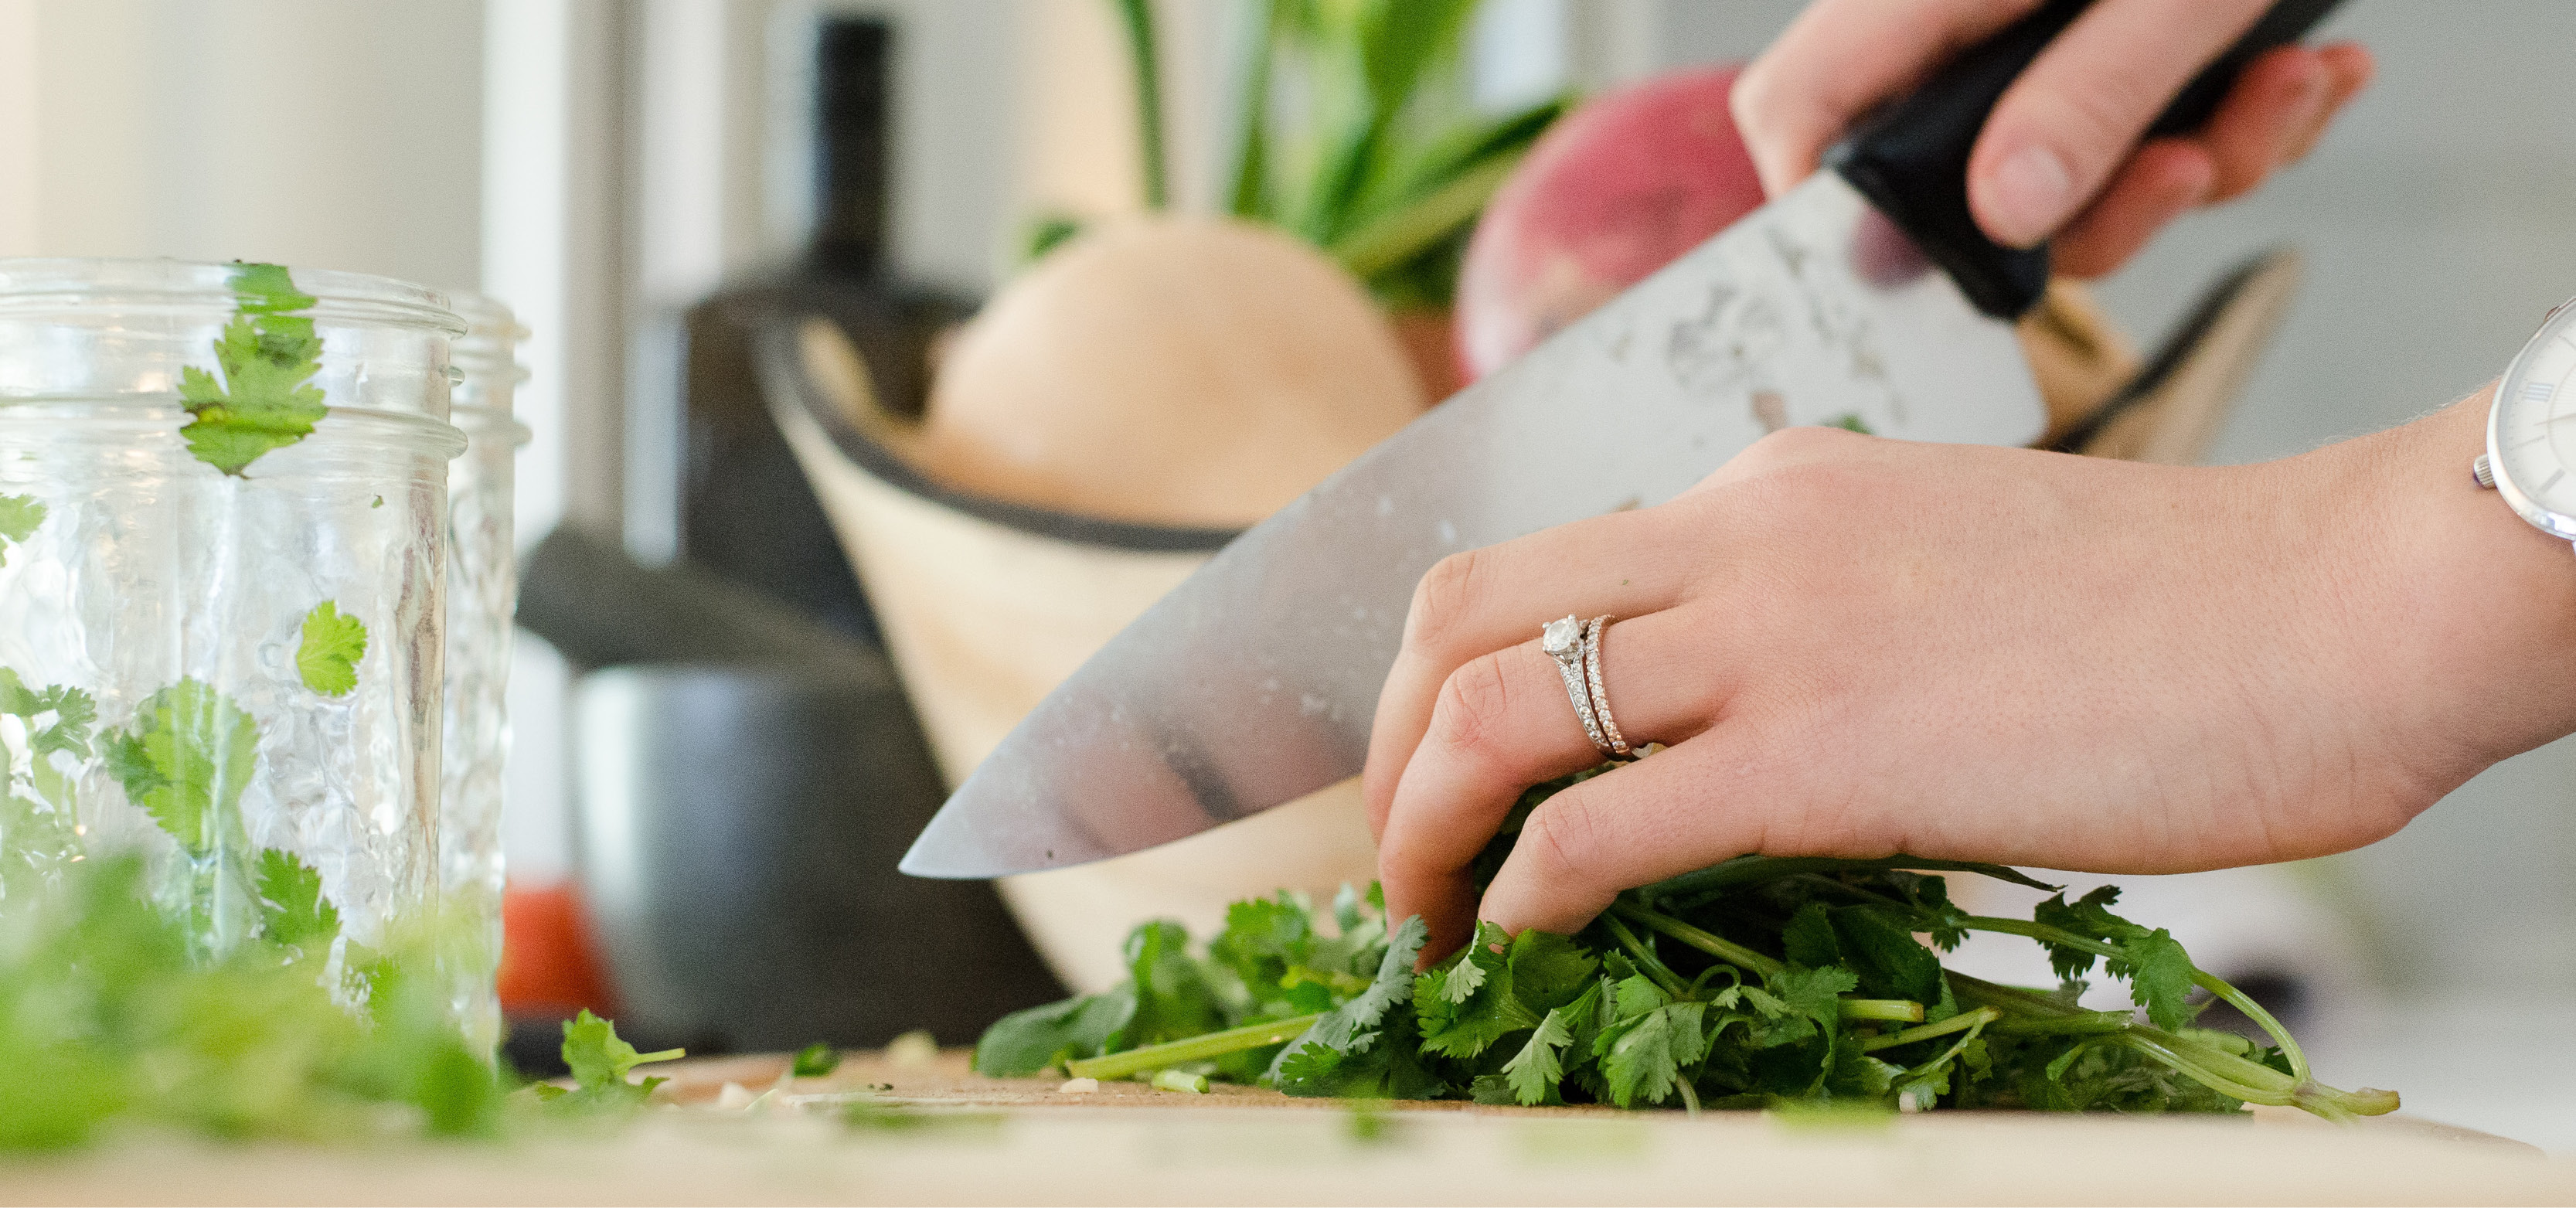 Female's hand cutting food ingredients with a butcher knife